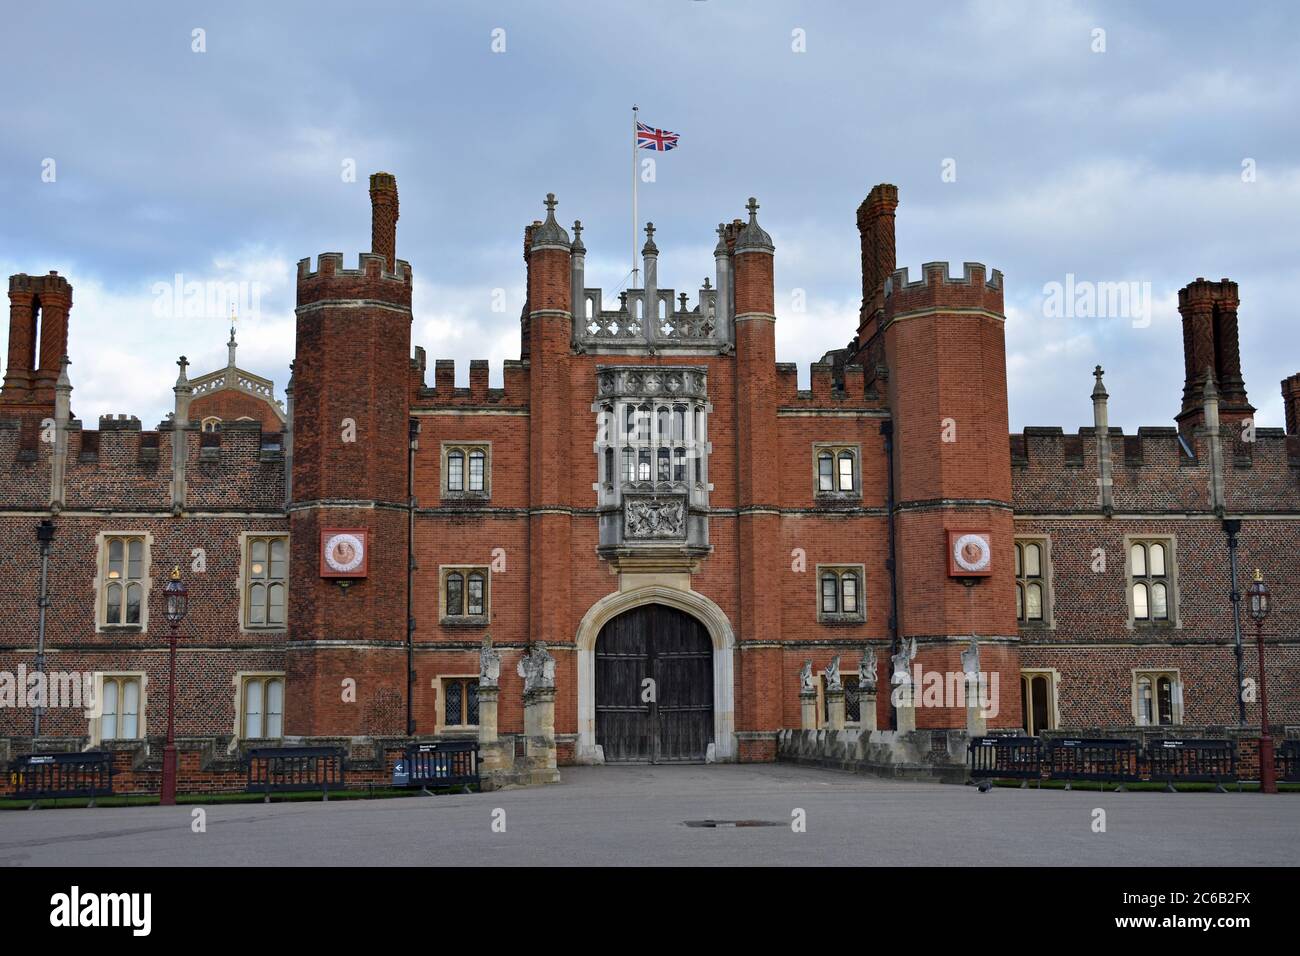 The main entrance to Hampton Court Palace, London.  The Large wooden doors are closed and there are no visitors.  Tudor brickwork and architecture. Stock Photo